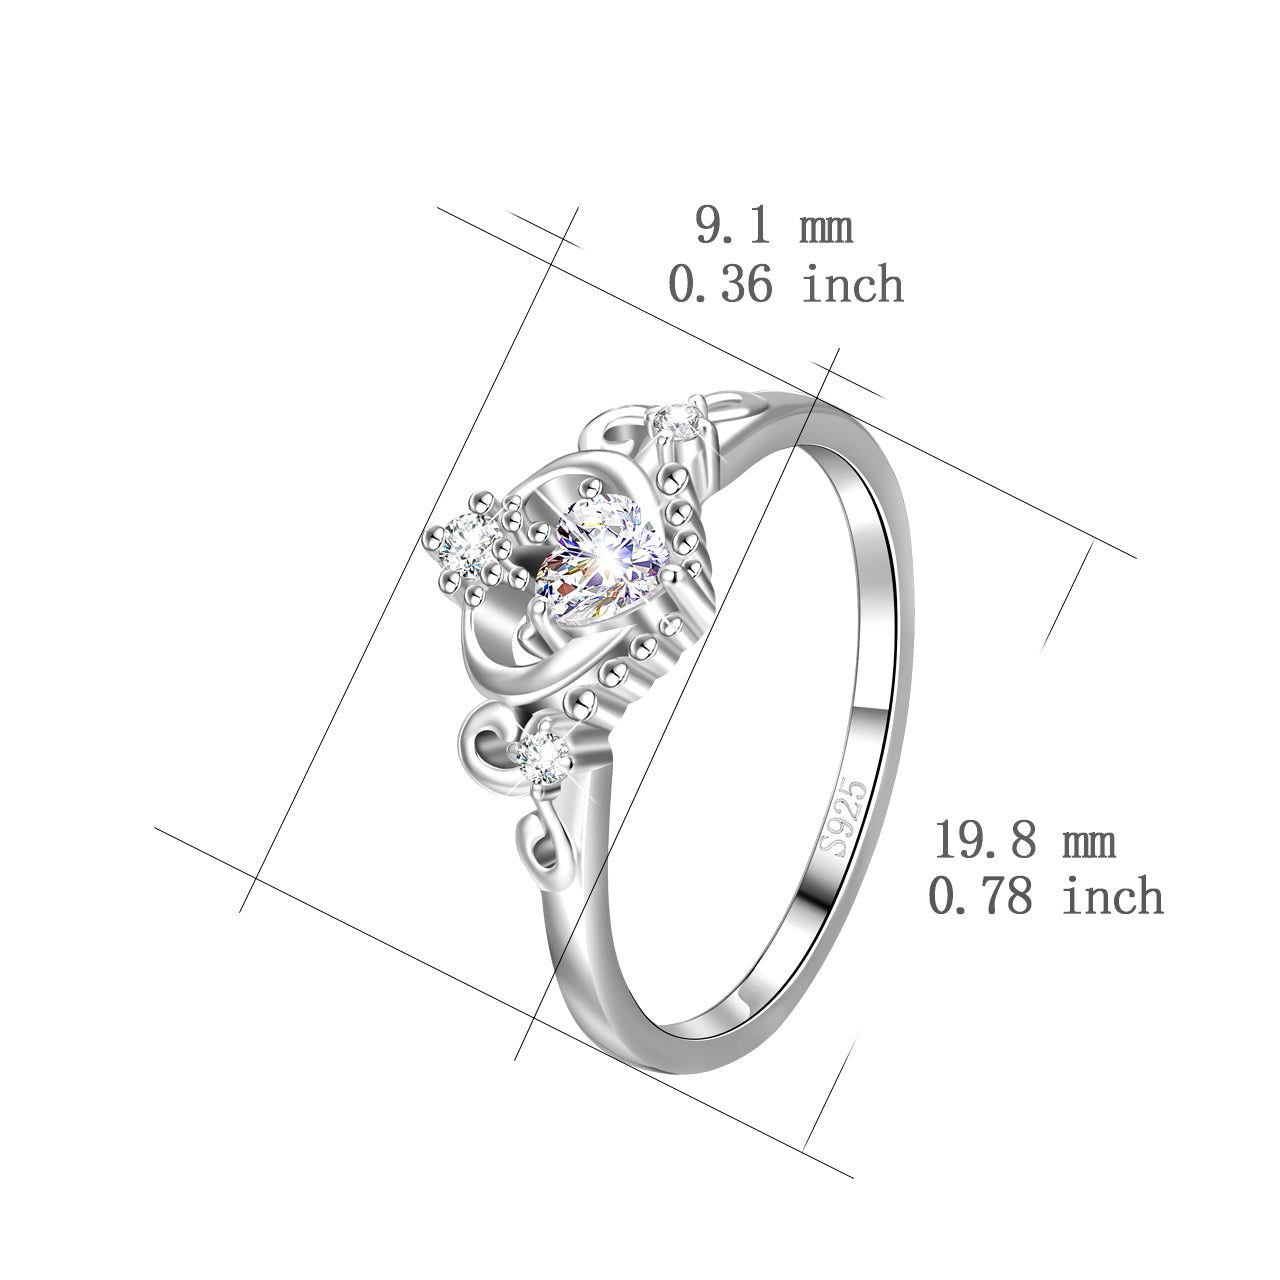 925 Sterling Silver Princess Tiara Crown Ring Set With CZ Antique Diamond  Rings For Women Perfect For Weddings Comes With Original Box From Uxtz,  $14.34 | DHgate.Com